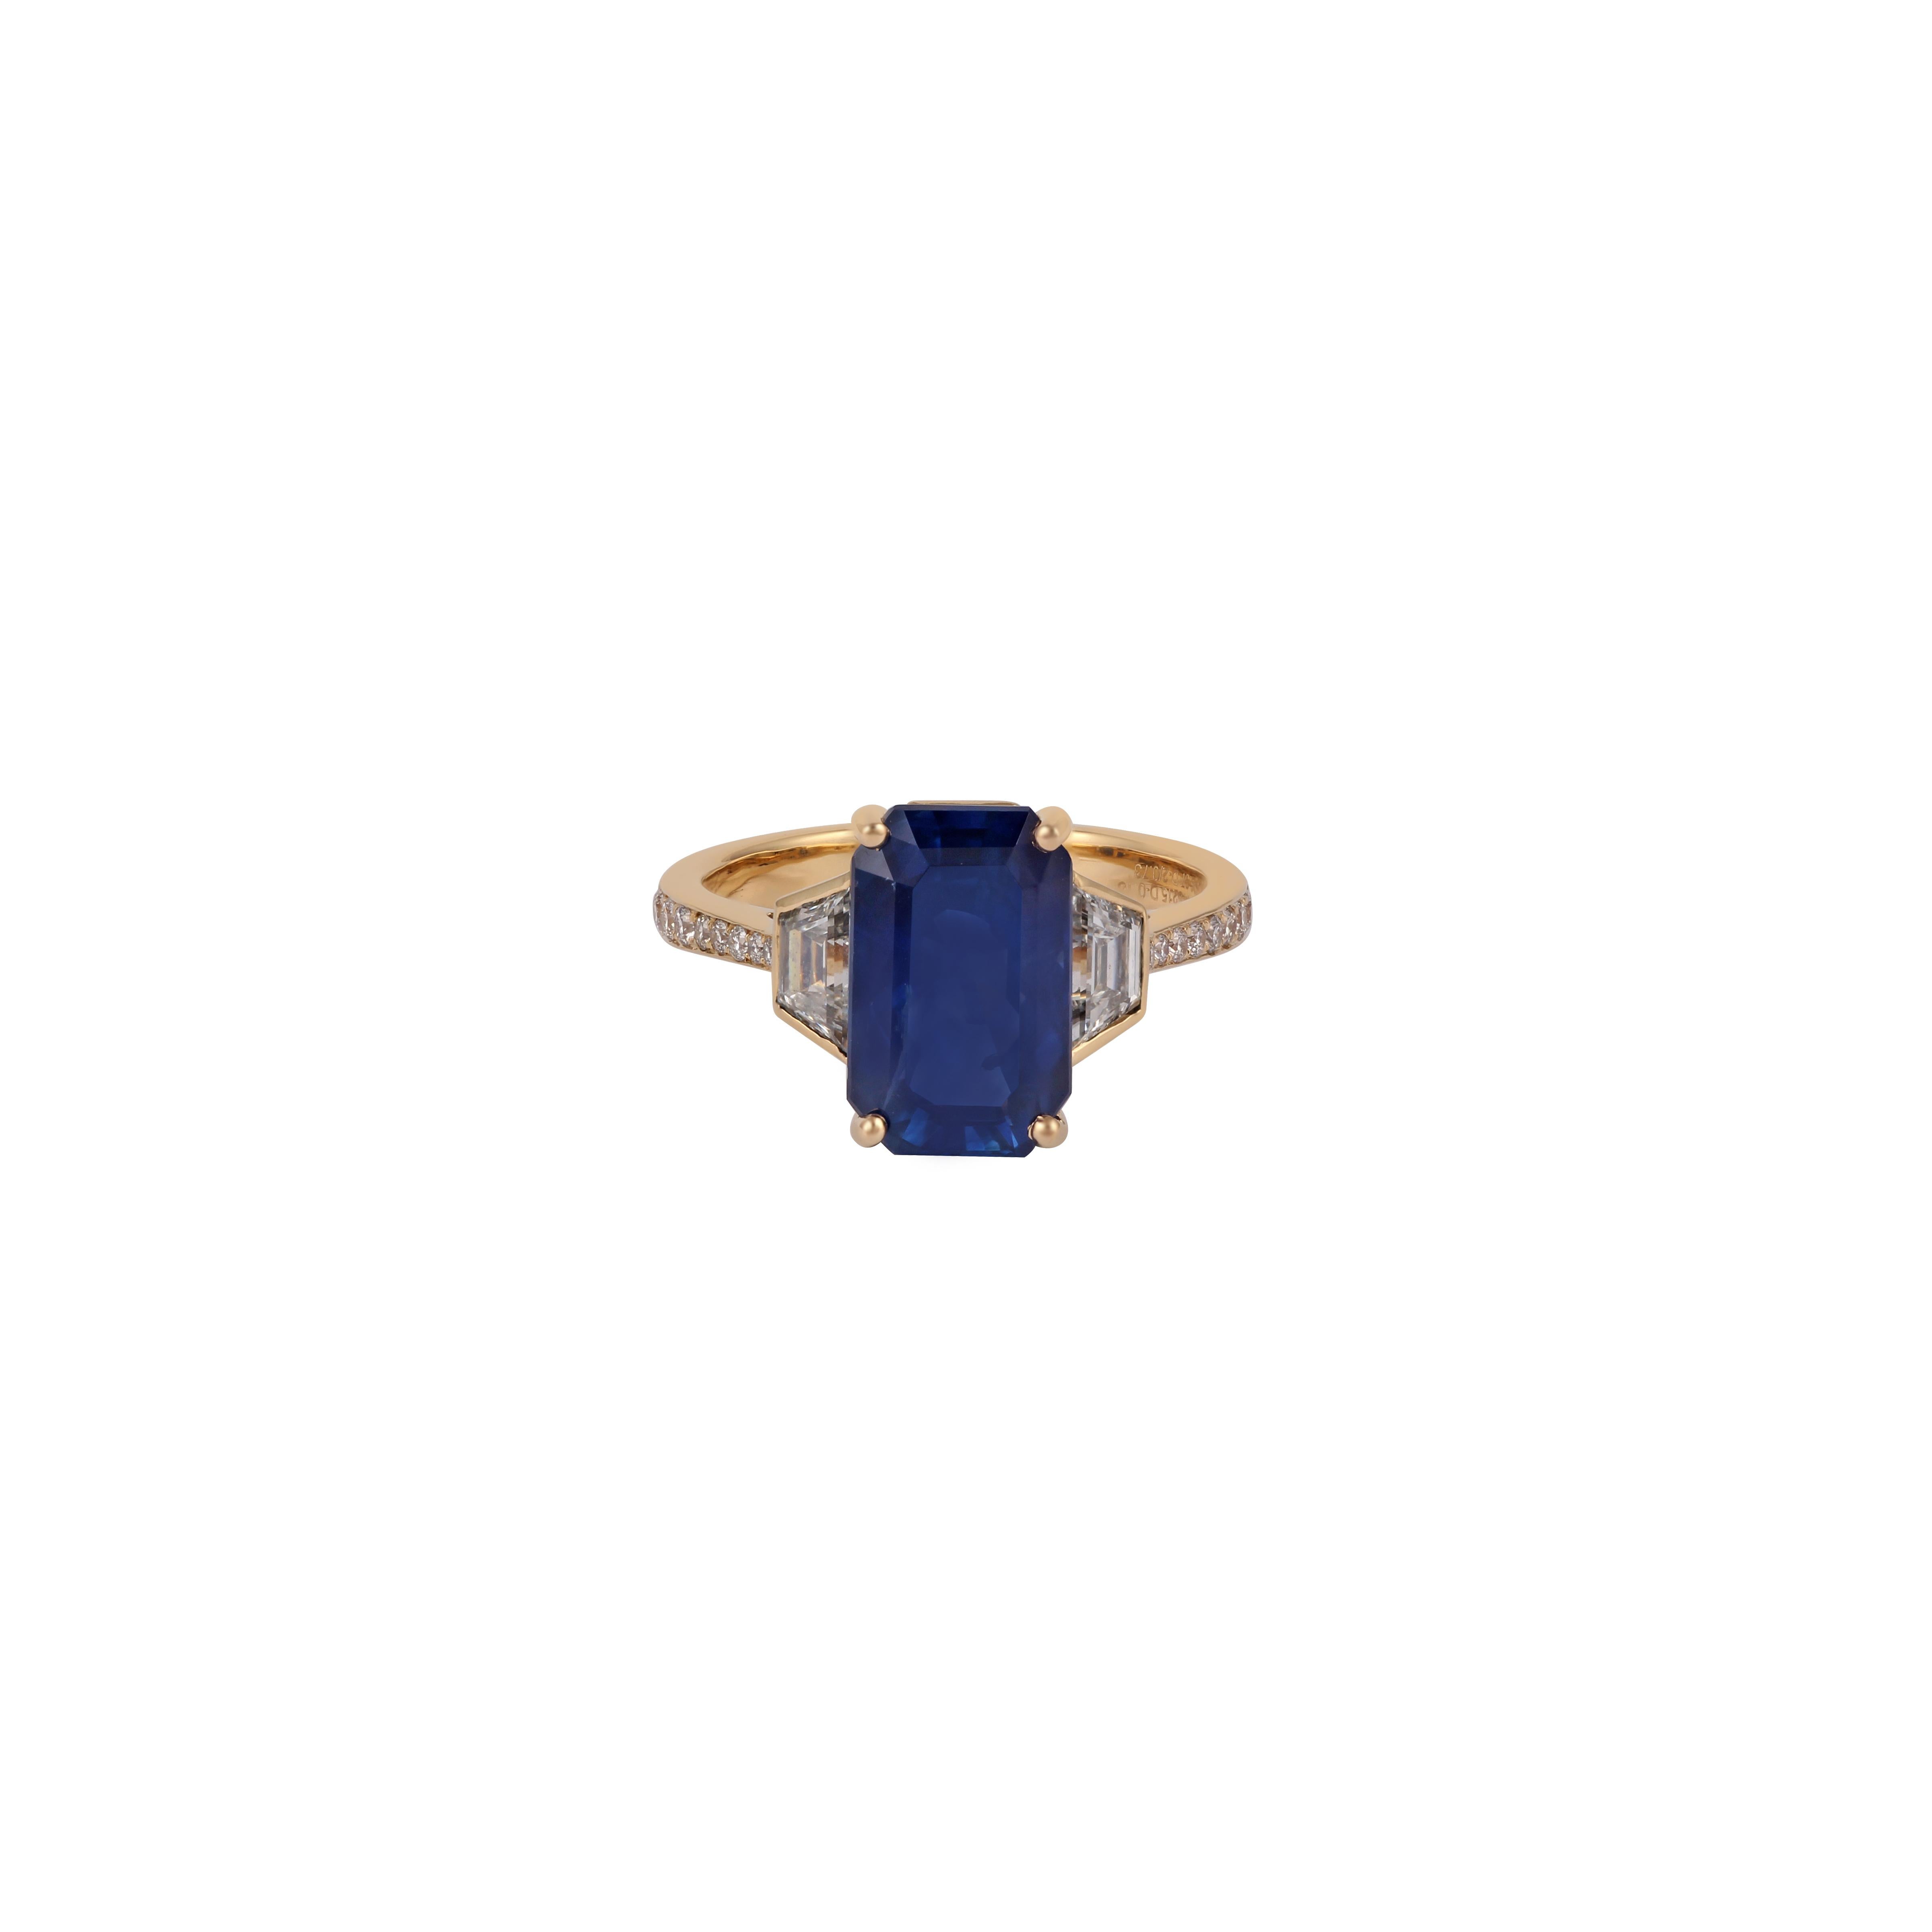 Its an exclusive Sapphire & diamond ring studded in 18k Rose gold with 1 piece of Sapphire weight 6.37 carat with 18 pieces of diamonds weight 0.89 carat this entire ring is studded in 18k Rose gold , ring size can be change as per the requirement,